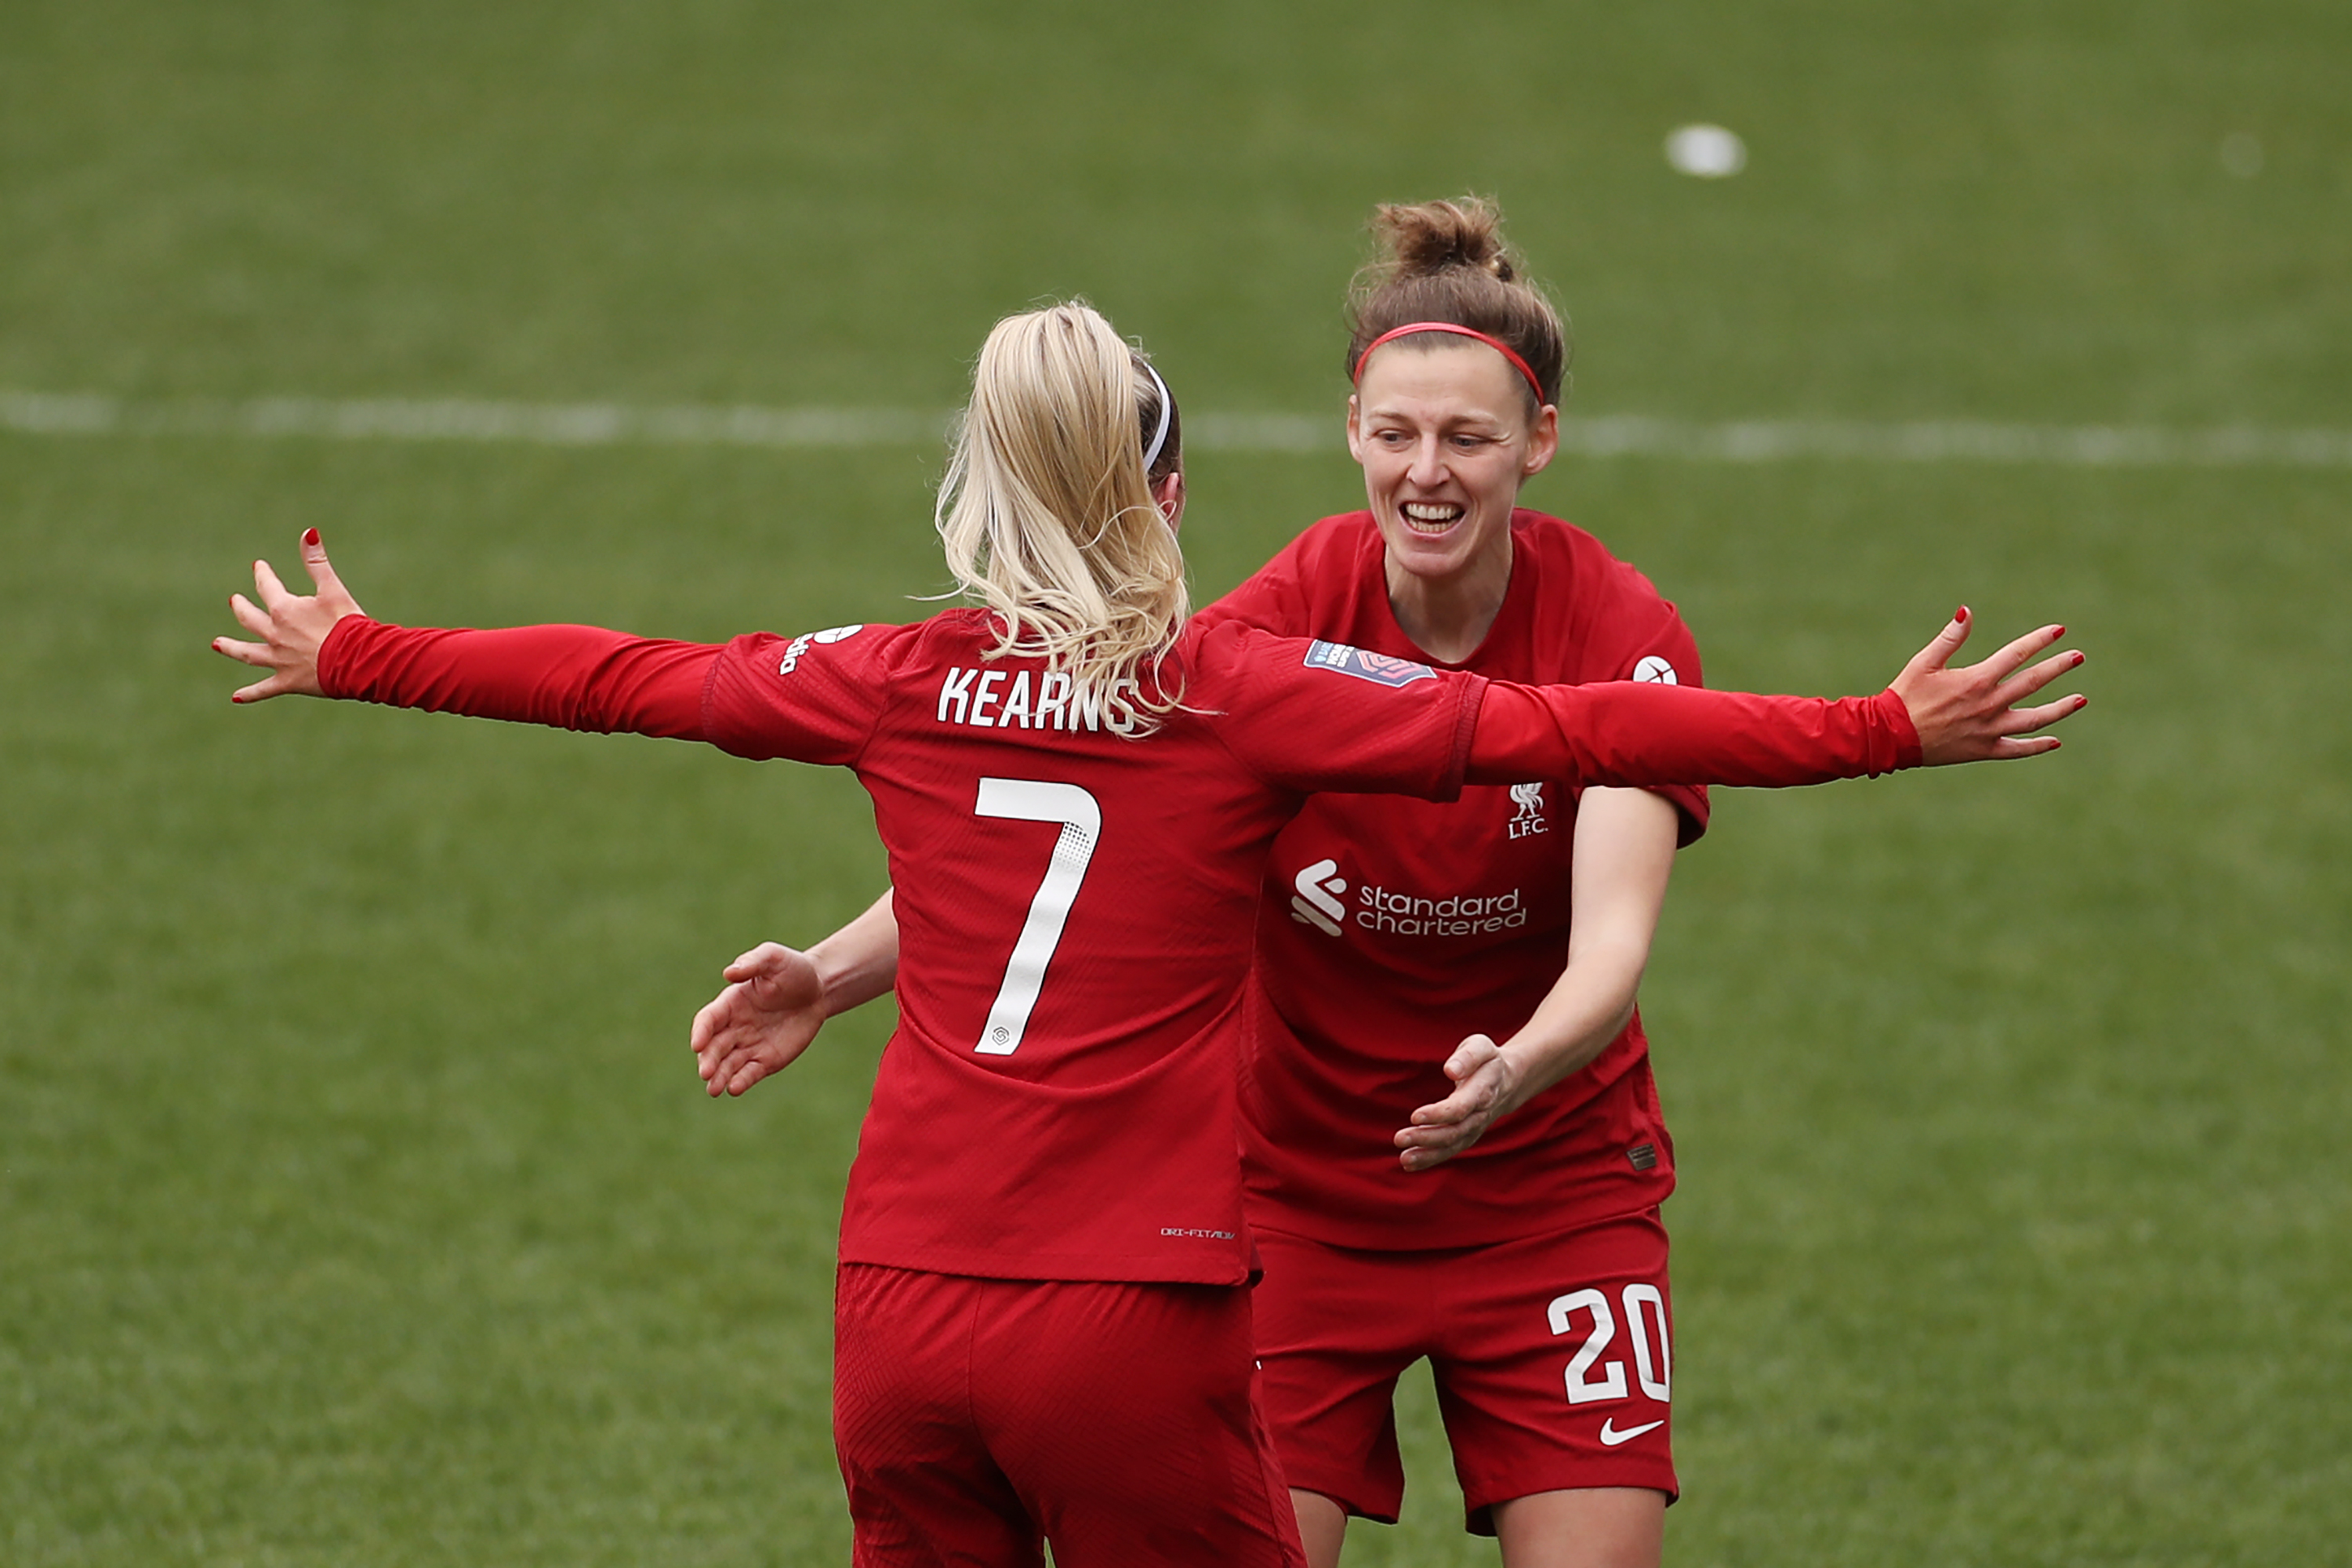 Missy Bo Kearns of Liverpool celebrates with teammate Yana Daniels after scoring the side’s second goal during the FA Women’s Super League match between Liverpool and Tottenham Hotspur at Prenton Park on March 12, 2023 in Birkenhead, England.